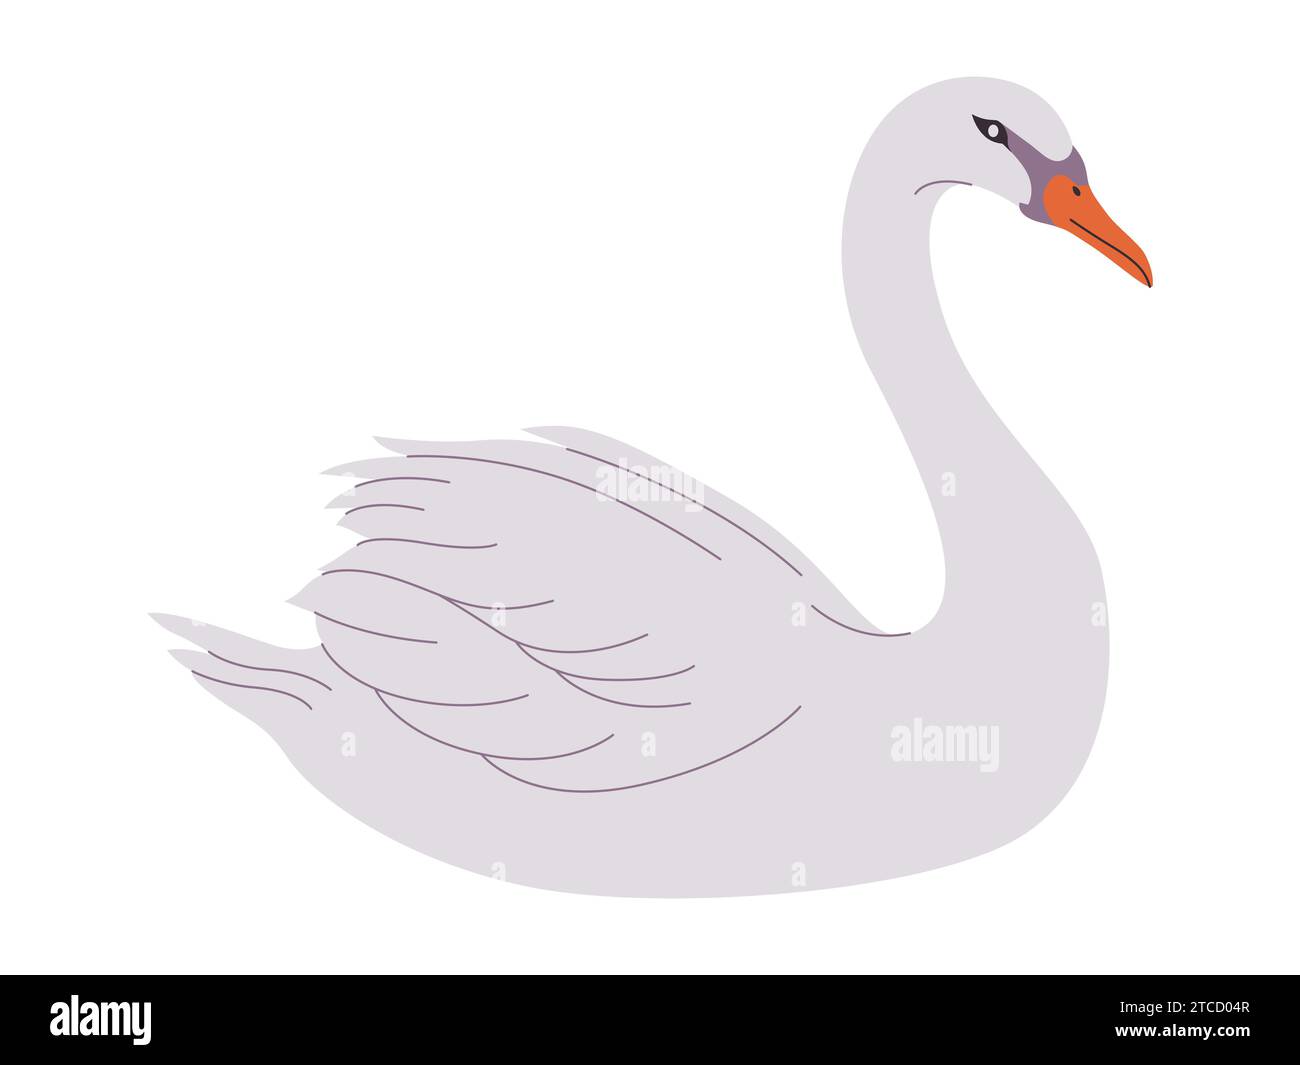 white color mute swan bird wild nature animal have beak and long neck with beautiful feather Stock Vector